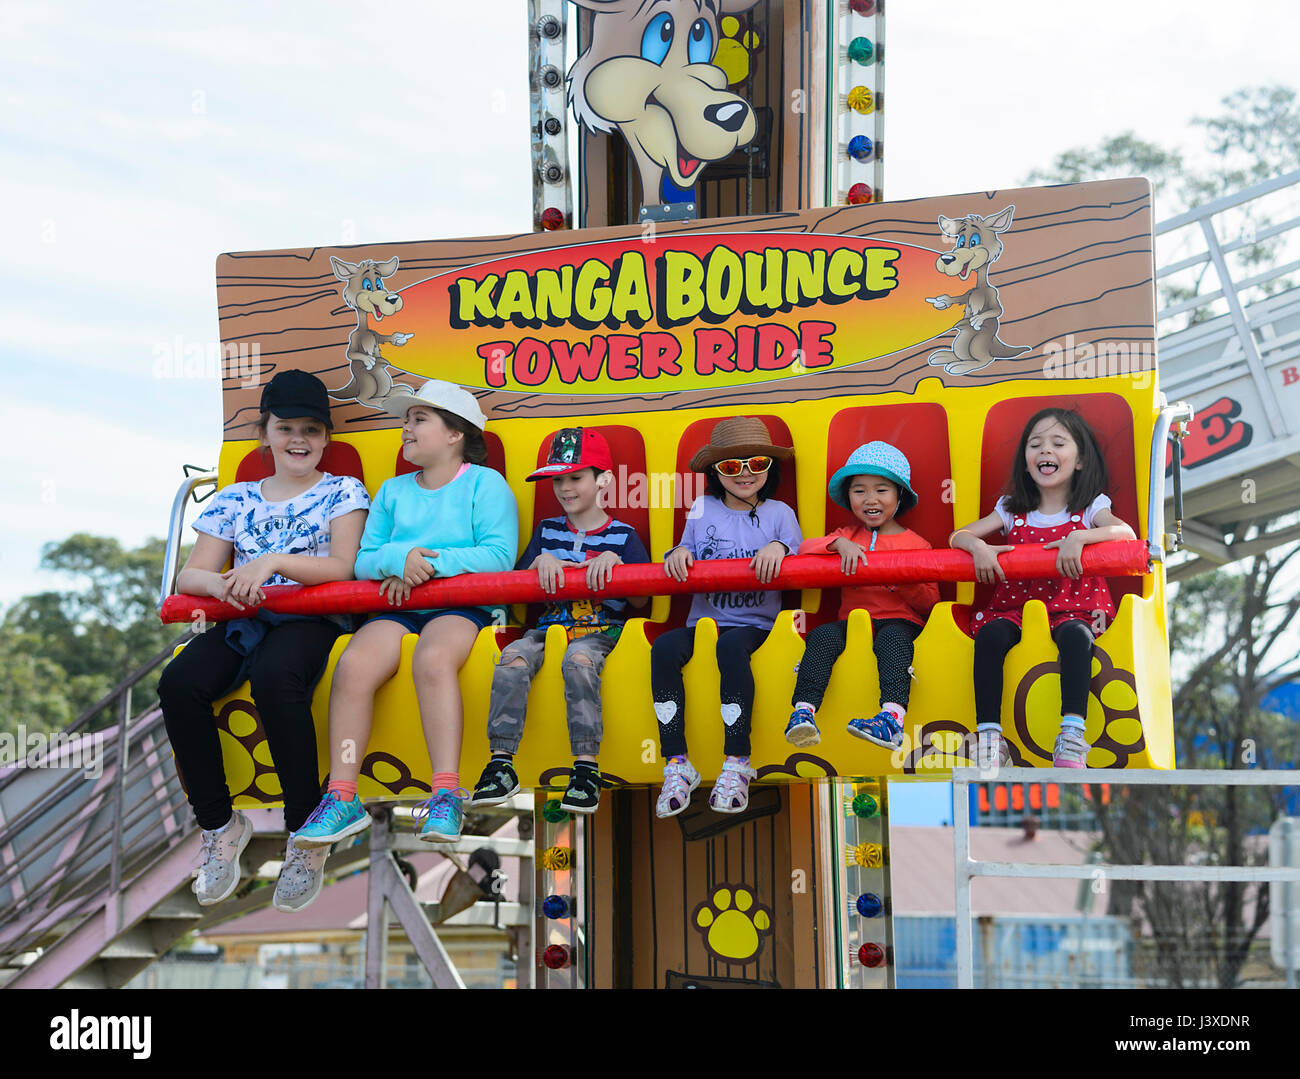 Young children enjoying the Kanga Bounce Tower Ride at Wings over Illawarra 2017 Airshow, Albion Park, NSW, Australia Stock Photo